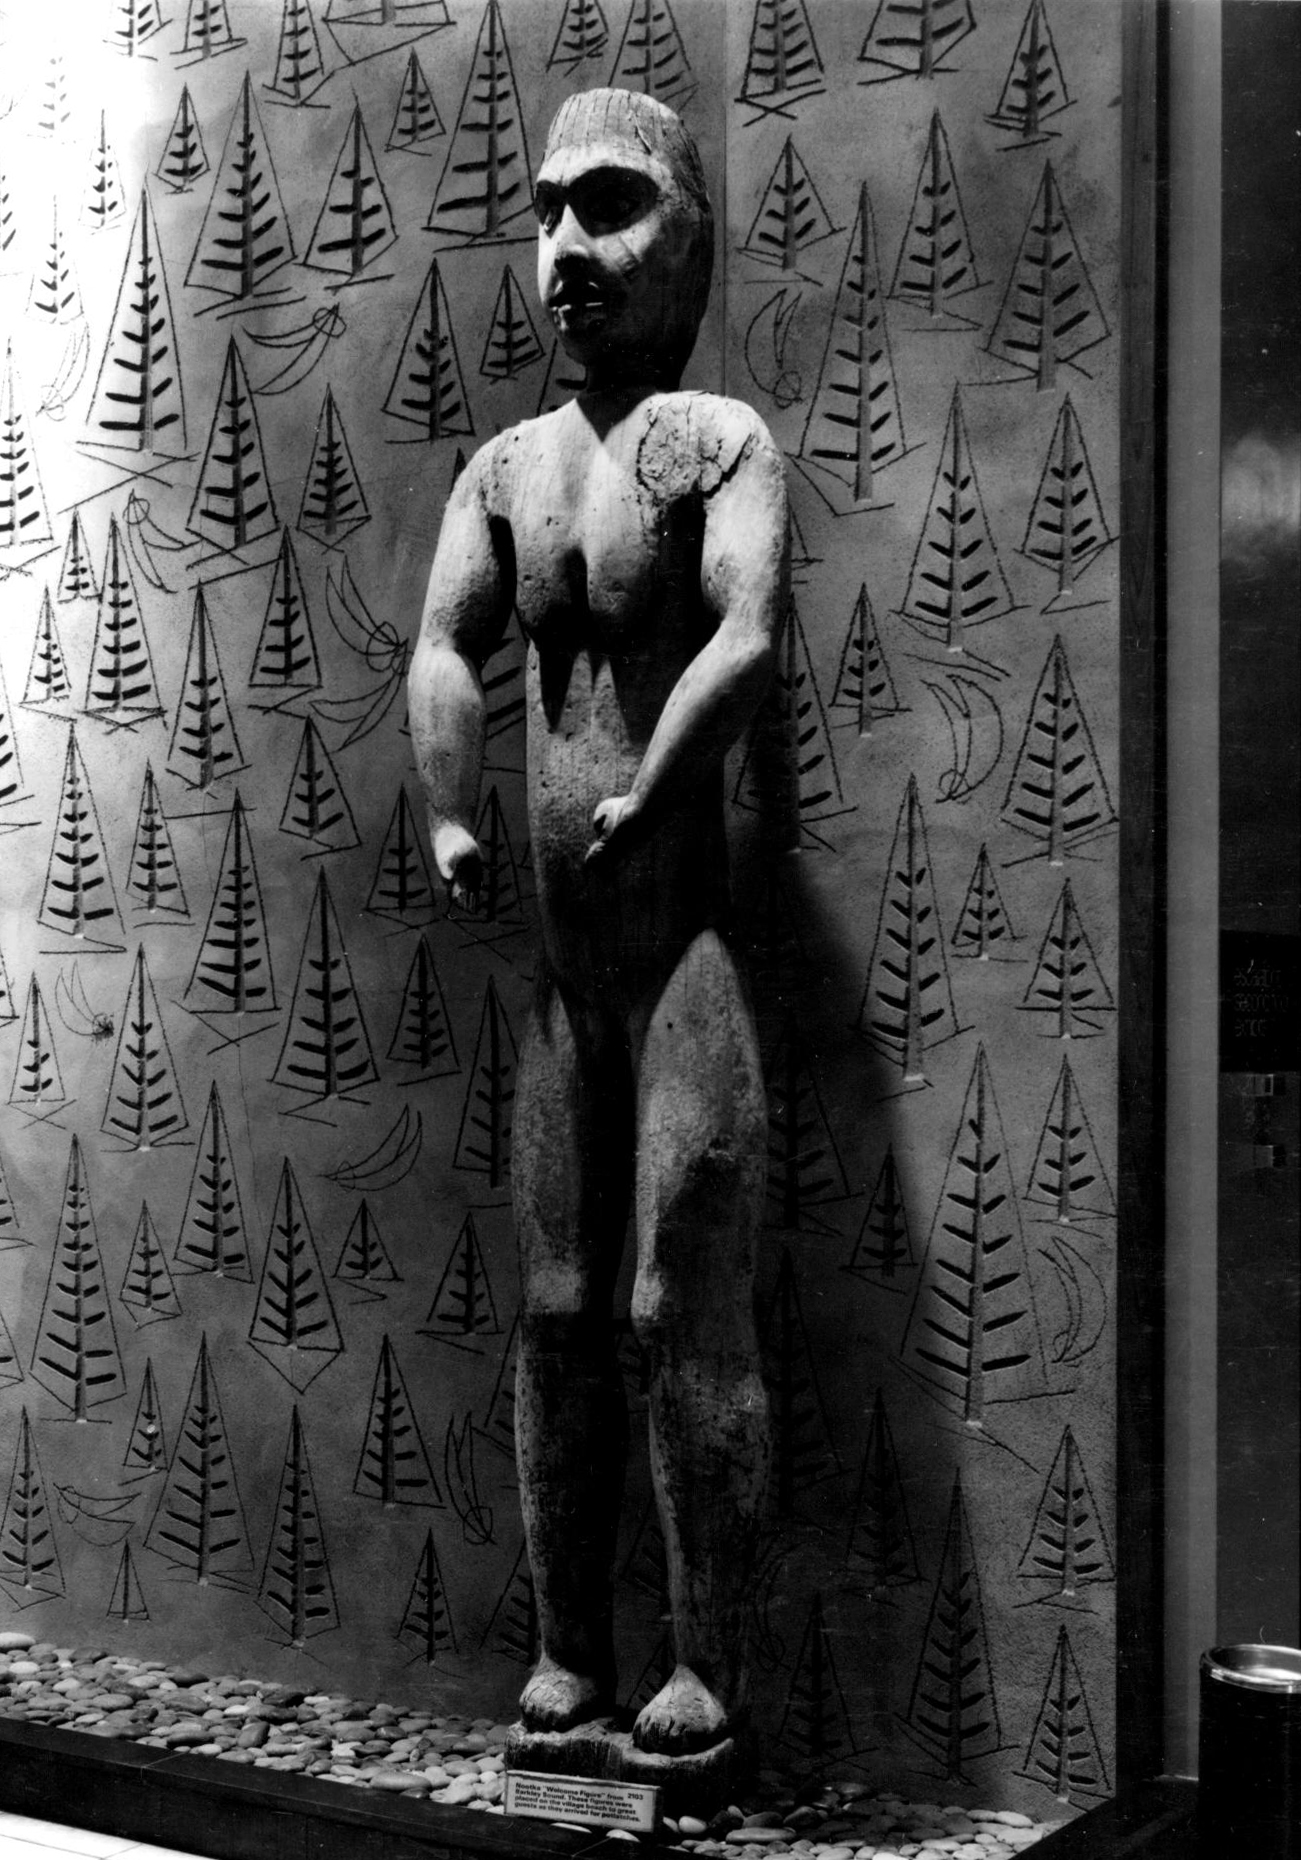 Carved human figure standing inside of the museum against the museum lobby’s wall.